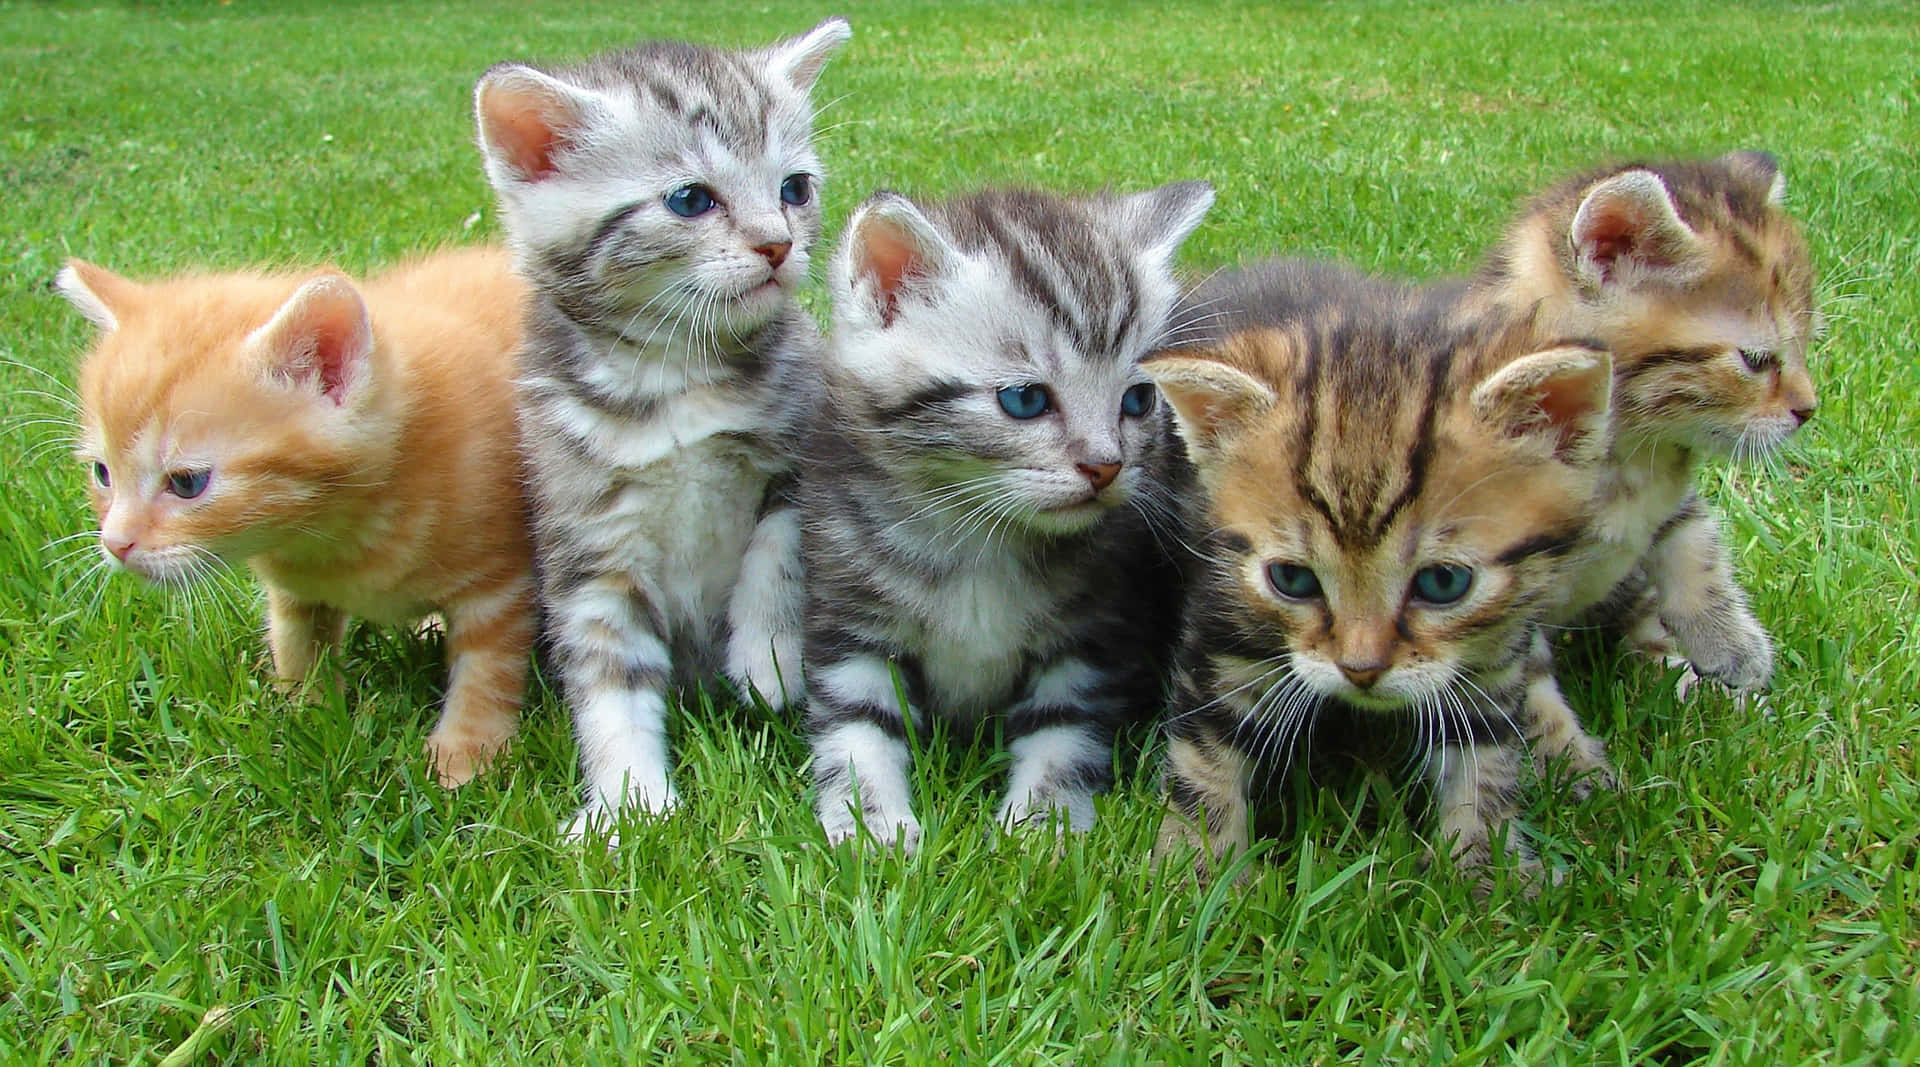 Cute Pets Kittens On Grass Picture